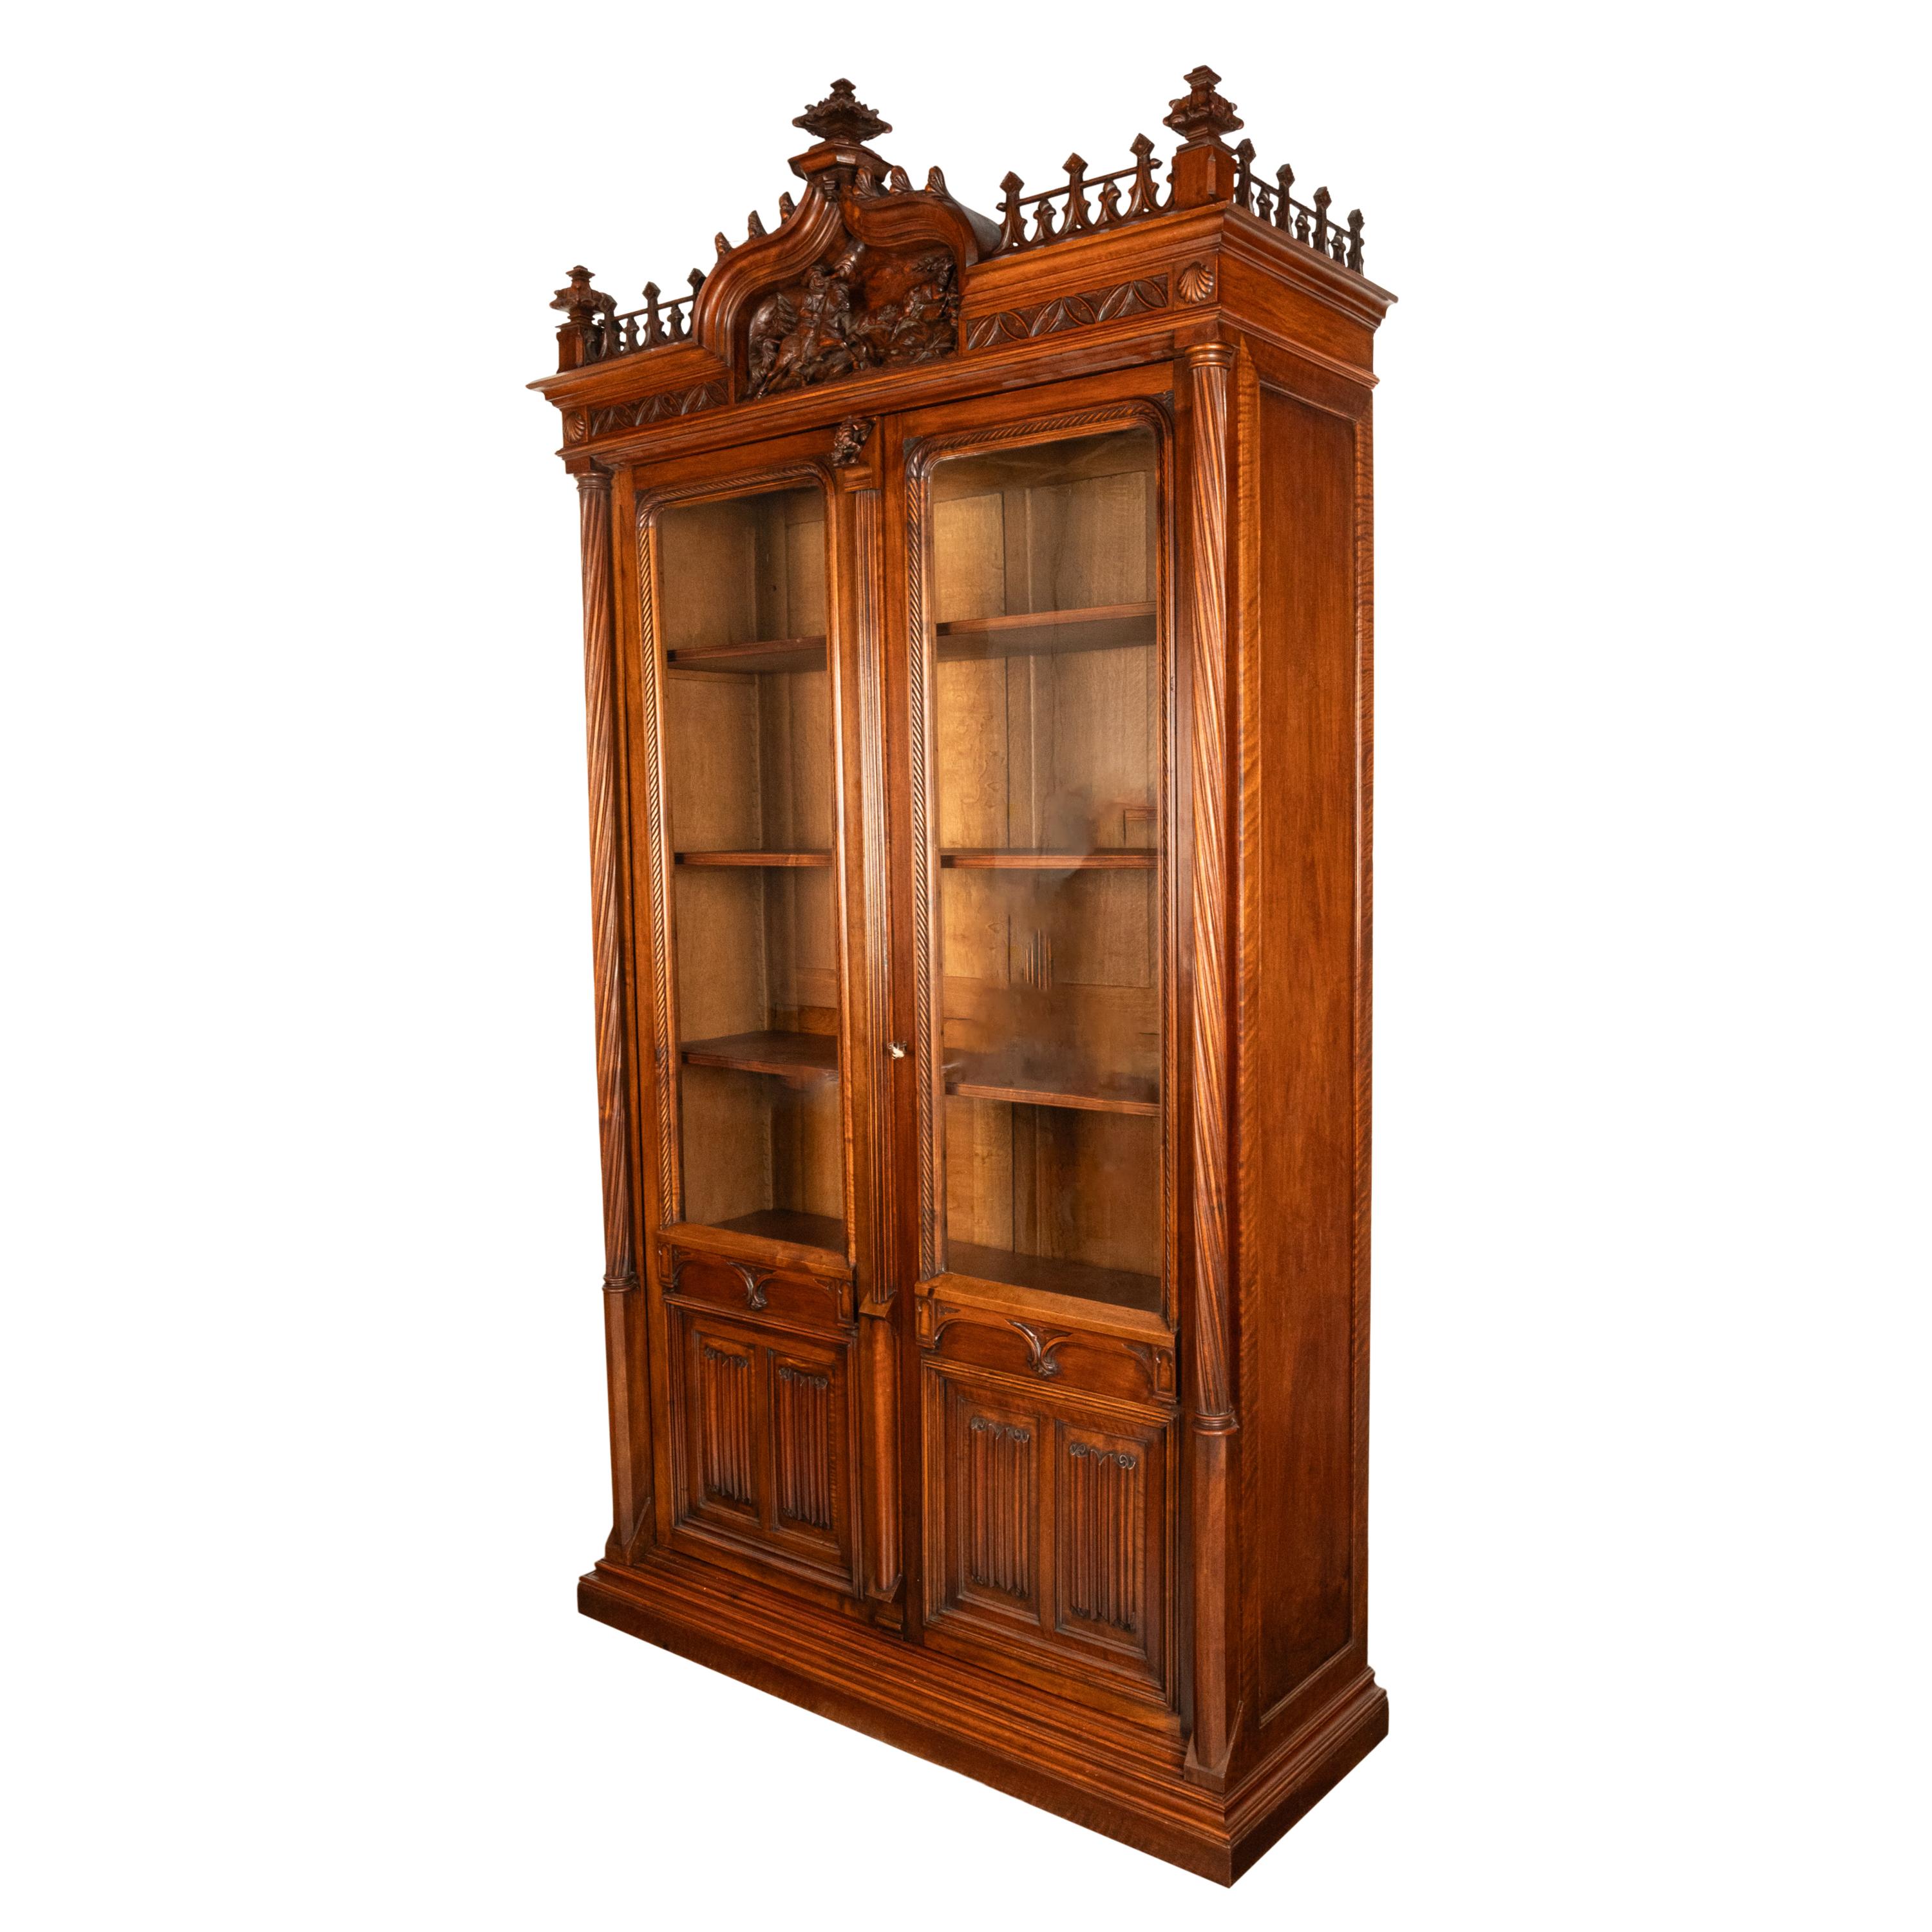 A very good carved French oak gothic library bookcase/bibliotheque, circa 1880.
This very handsome oak bookcase does break down into many parts for ease of movement and is easily disassembeled & assembled.
To the top are three large carved